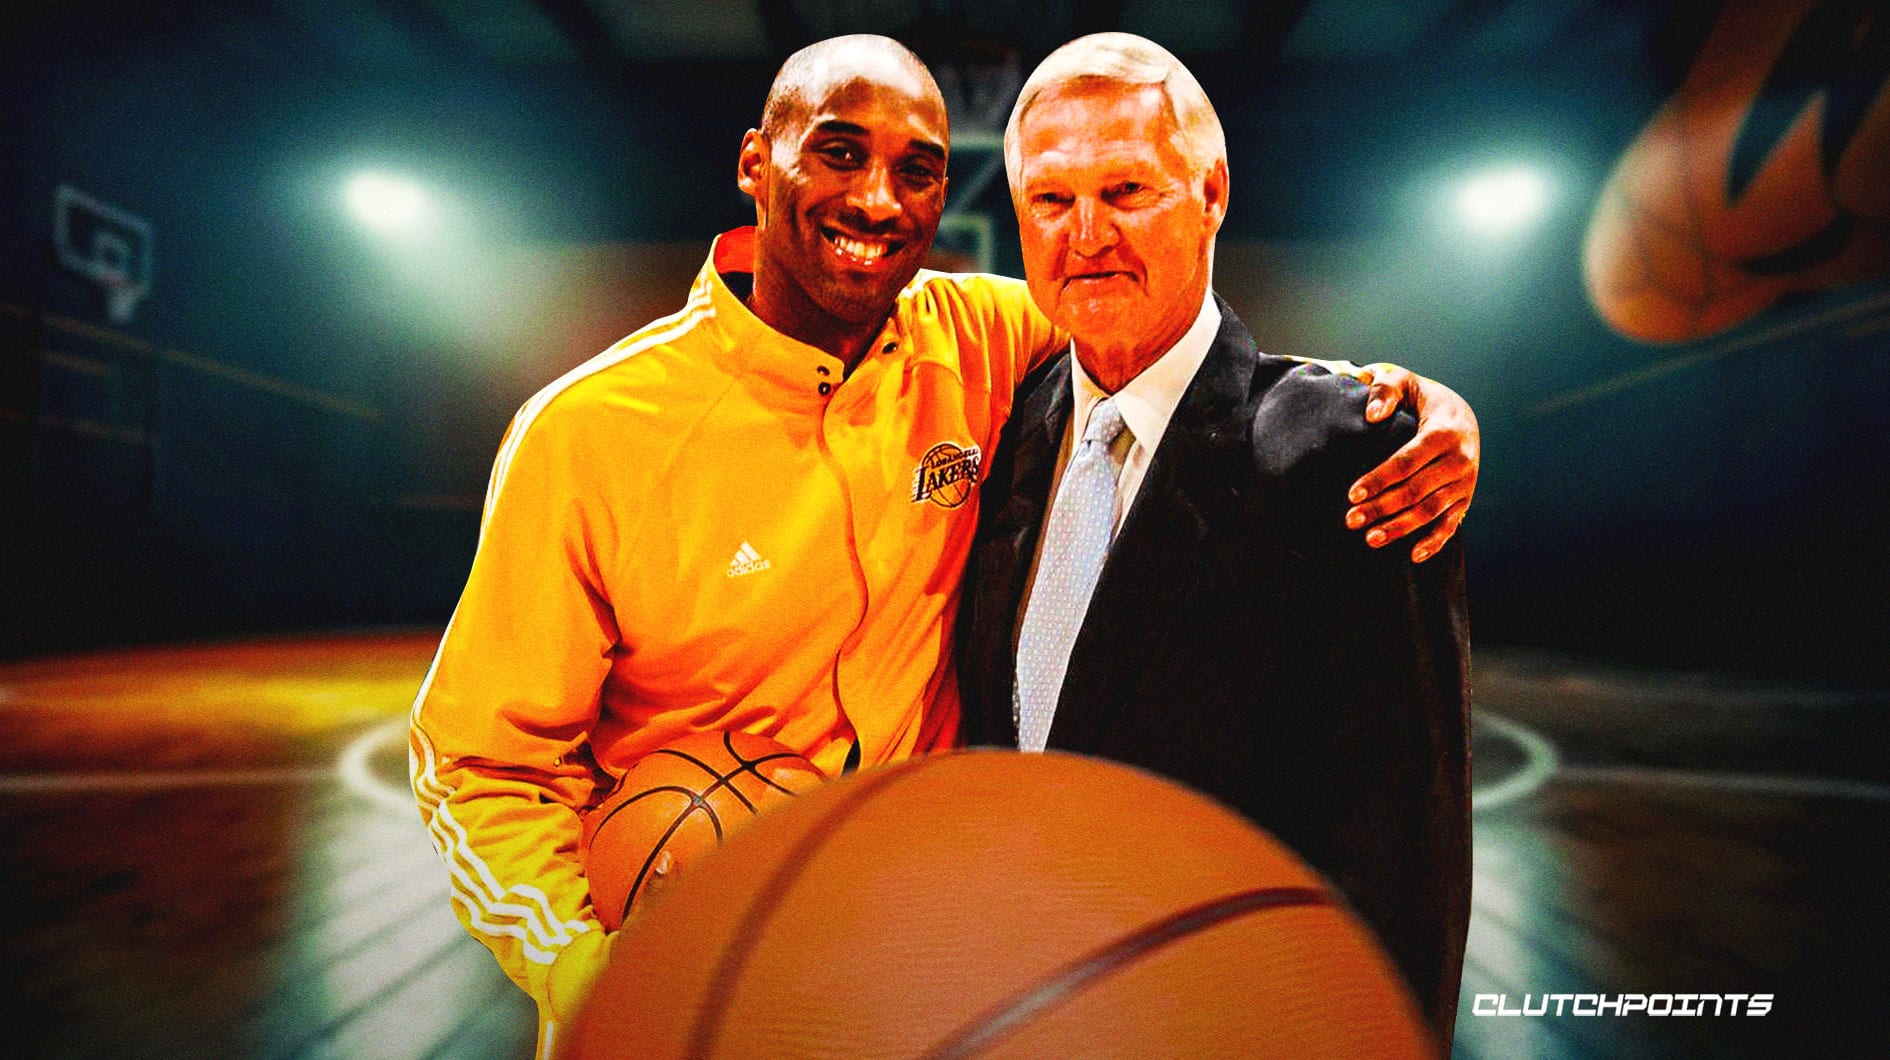 Kobe Bryant -- 15 iconic images of the Lakers legend from the